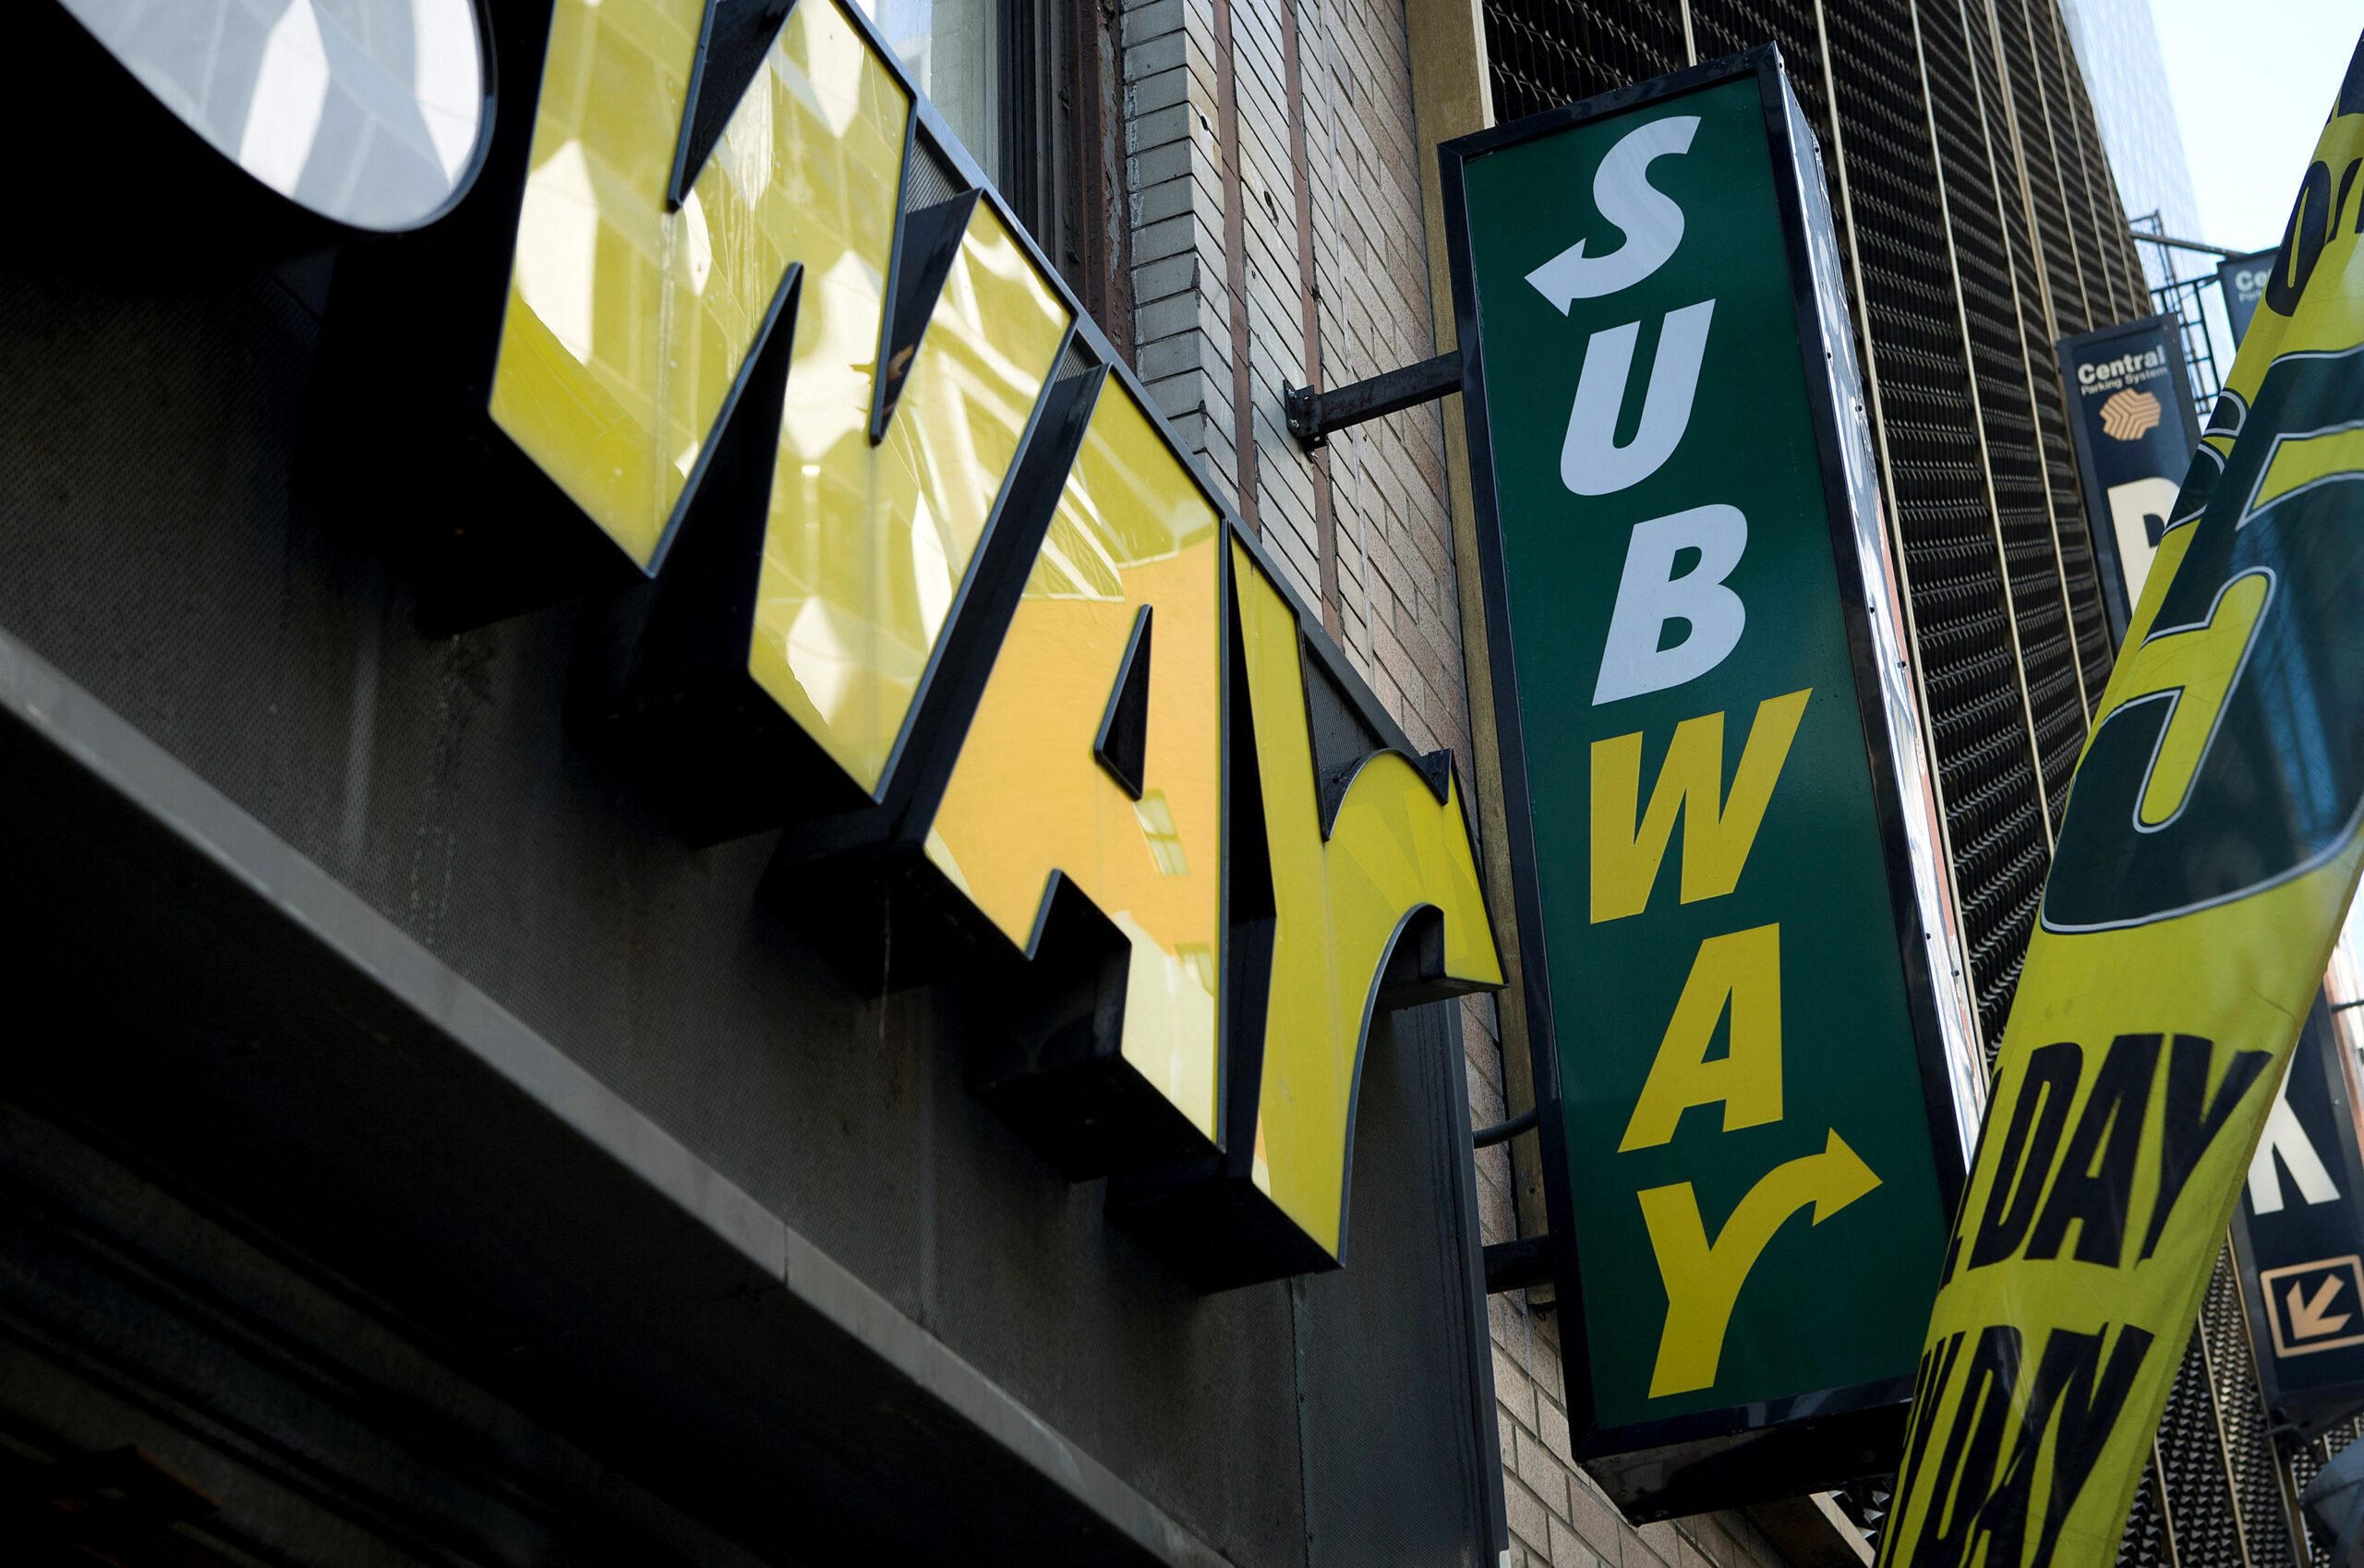 Subway can be sued over its tuna – US judge